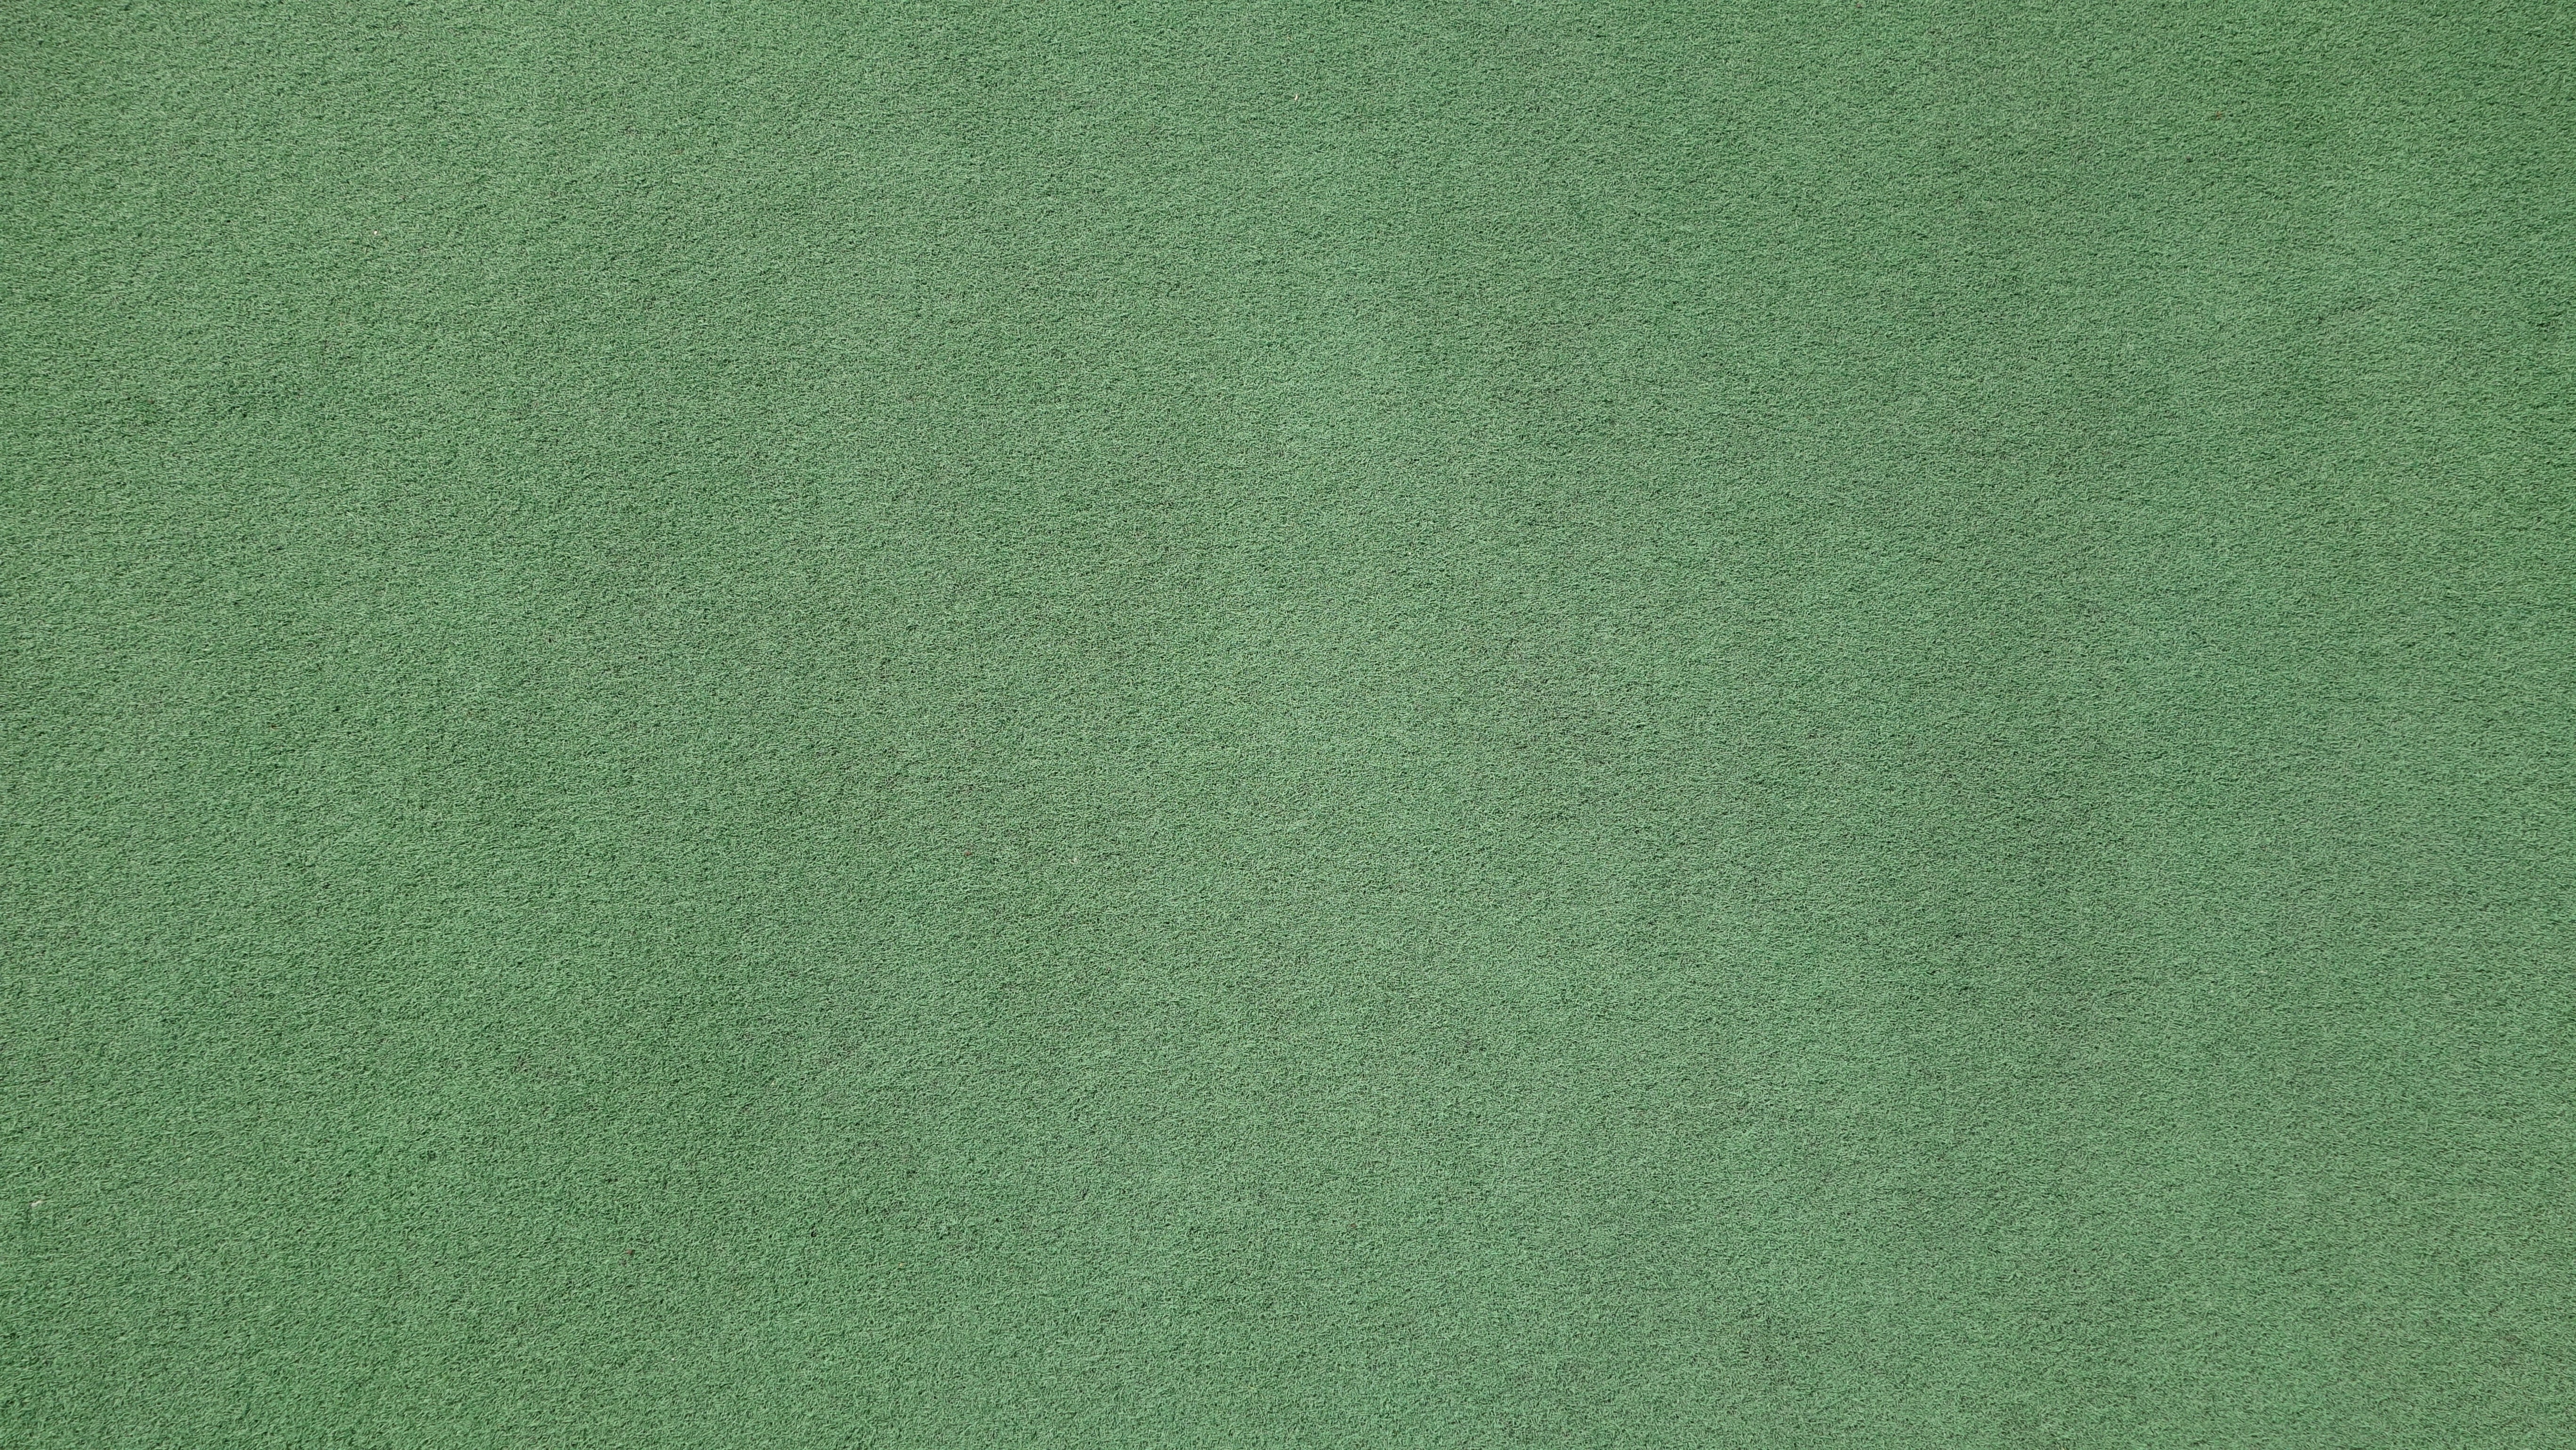 untitled, Abstract, Carpet, Artificial Turf, Rug, golf course